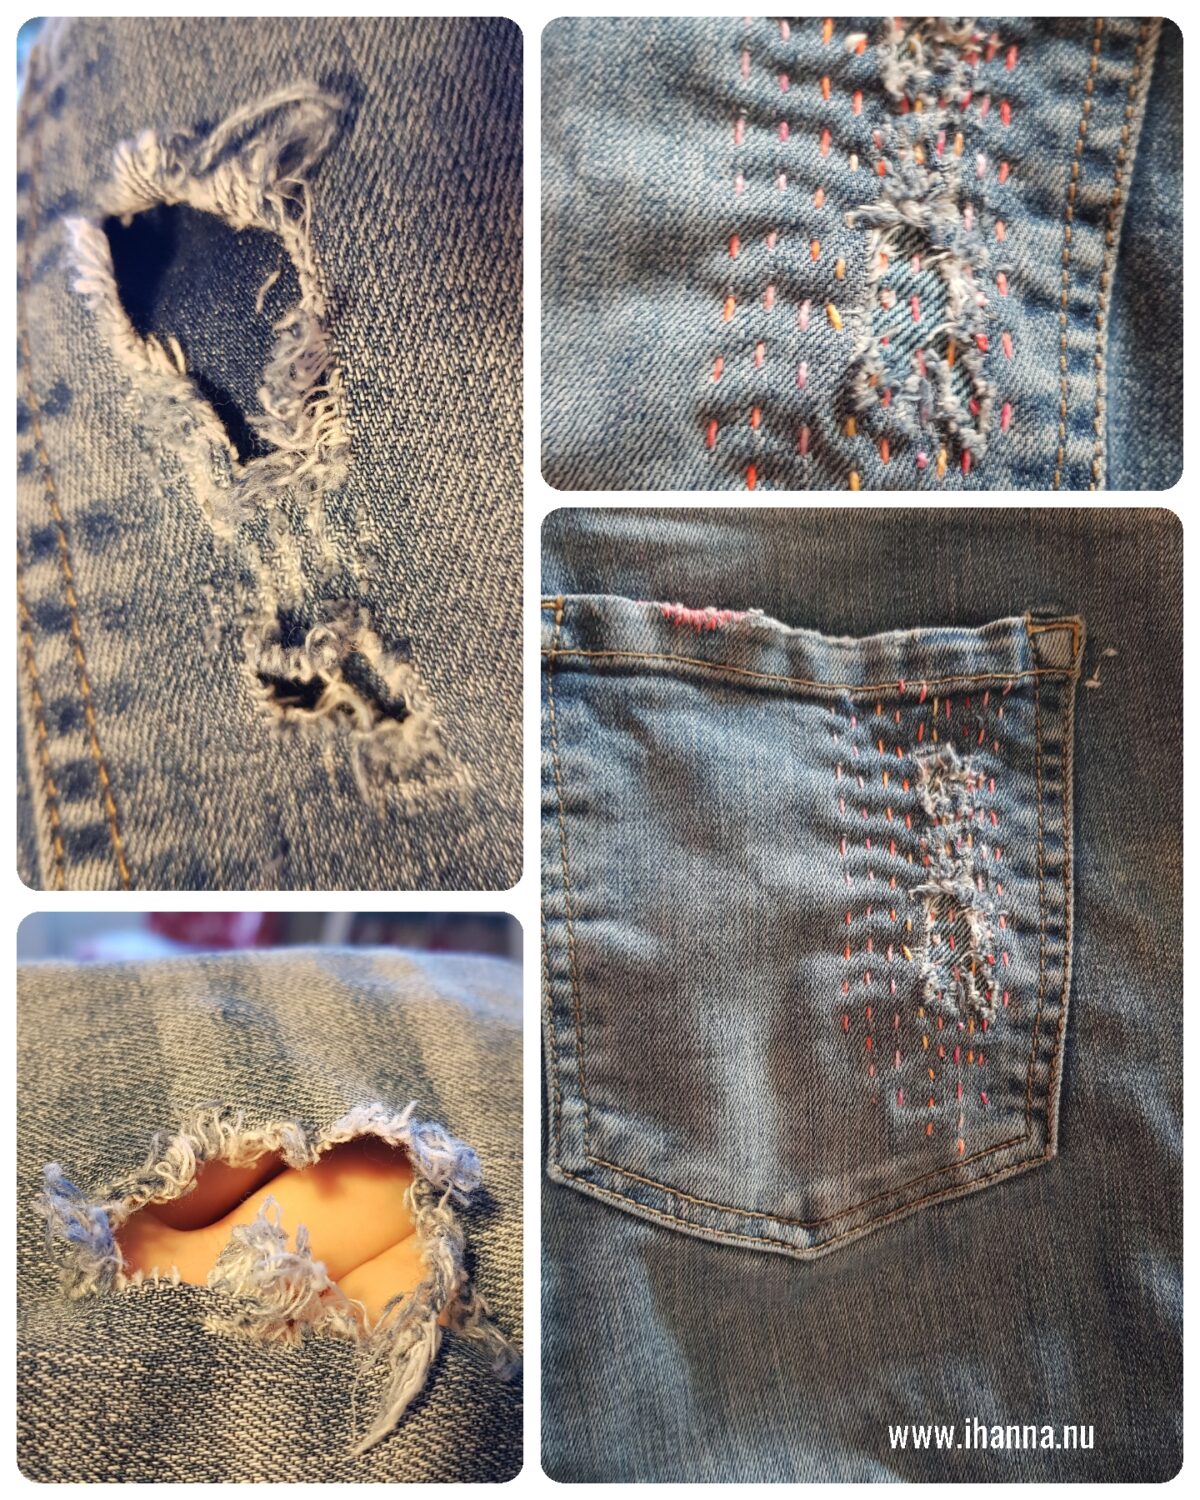 Mending jeans with patches and visible stitching is SO fun. Photo copyright Hanna Andersson